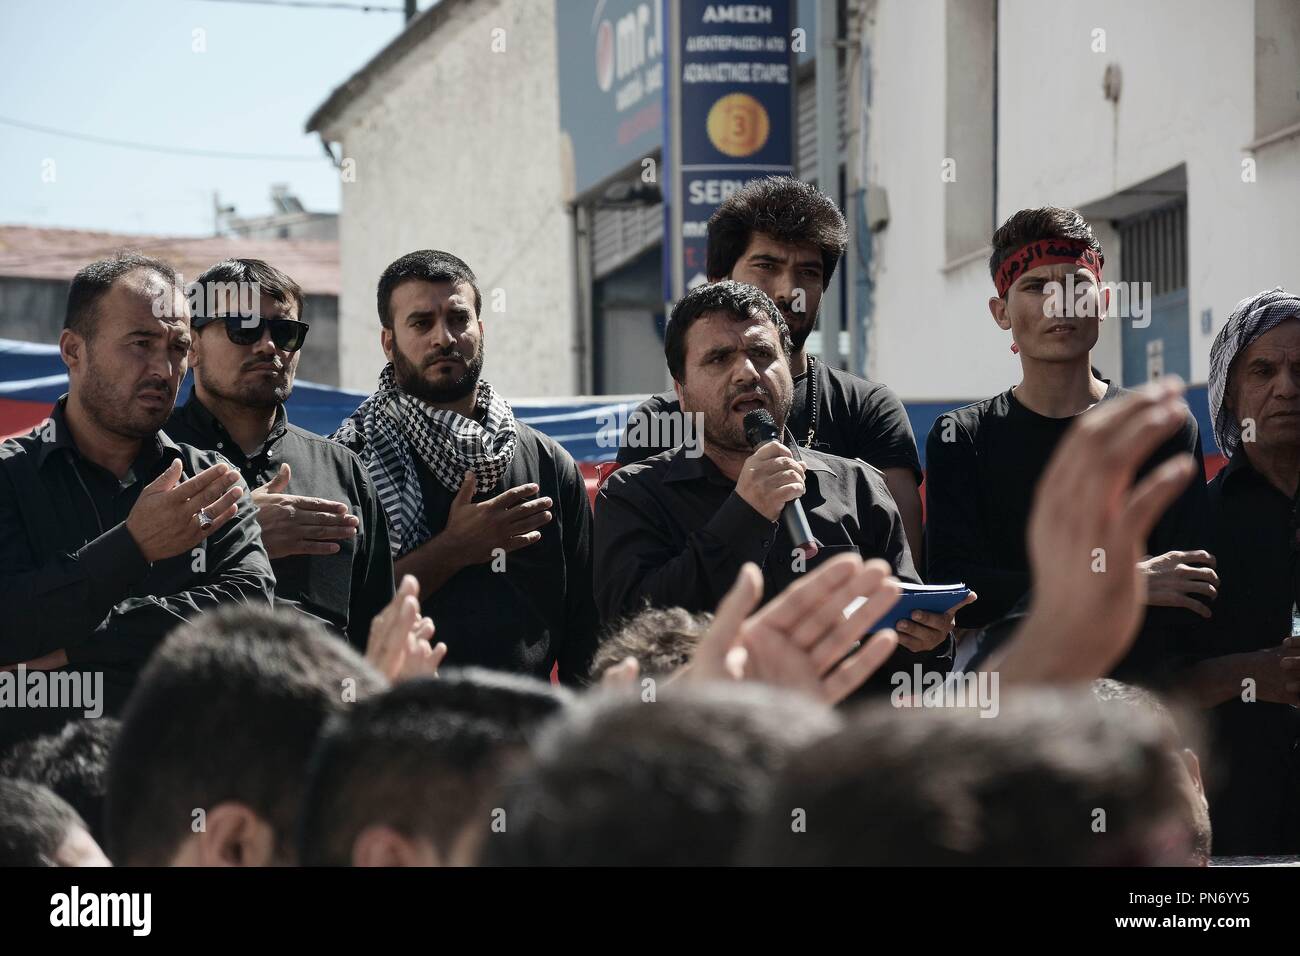 Piraeus, Greece. 20th Sep, 2018. A man seen speaking to Shia Muslims during the commemoration.Ashura commemoration, Muslims mourn the slaying of the Prophet Mohammed's grandson Imam Hussain, who was martyred along with his 72 companions in Karbala the city of Iraq in 680 AD. Credit: Giorgos Zachos/SOPA Images/ZUMA Wire/Alamy Live News Stock Photo